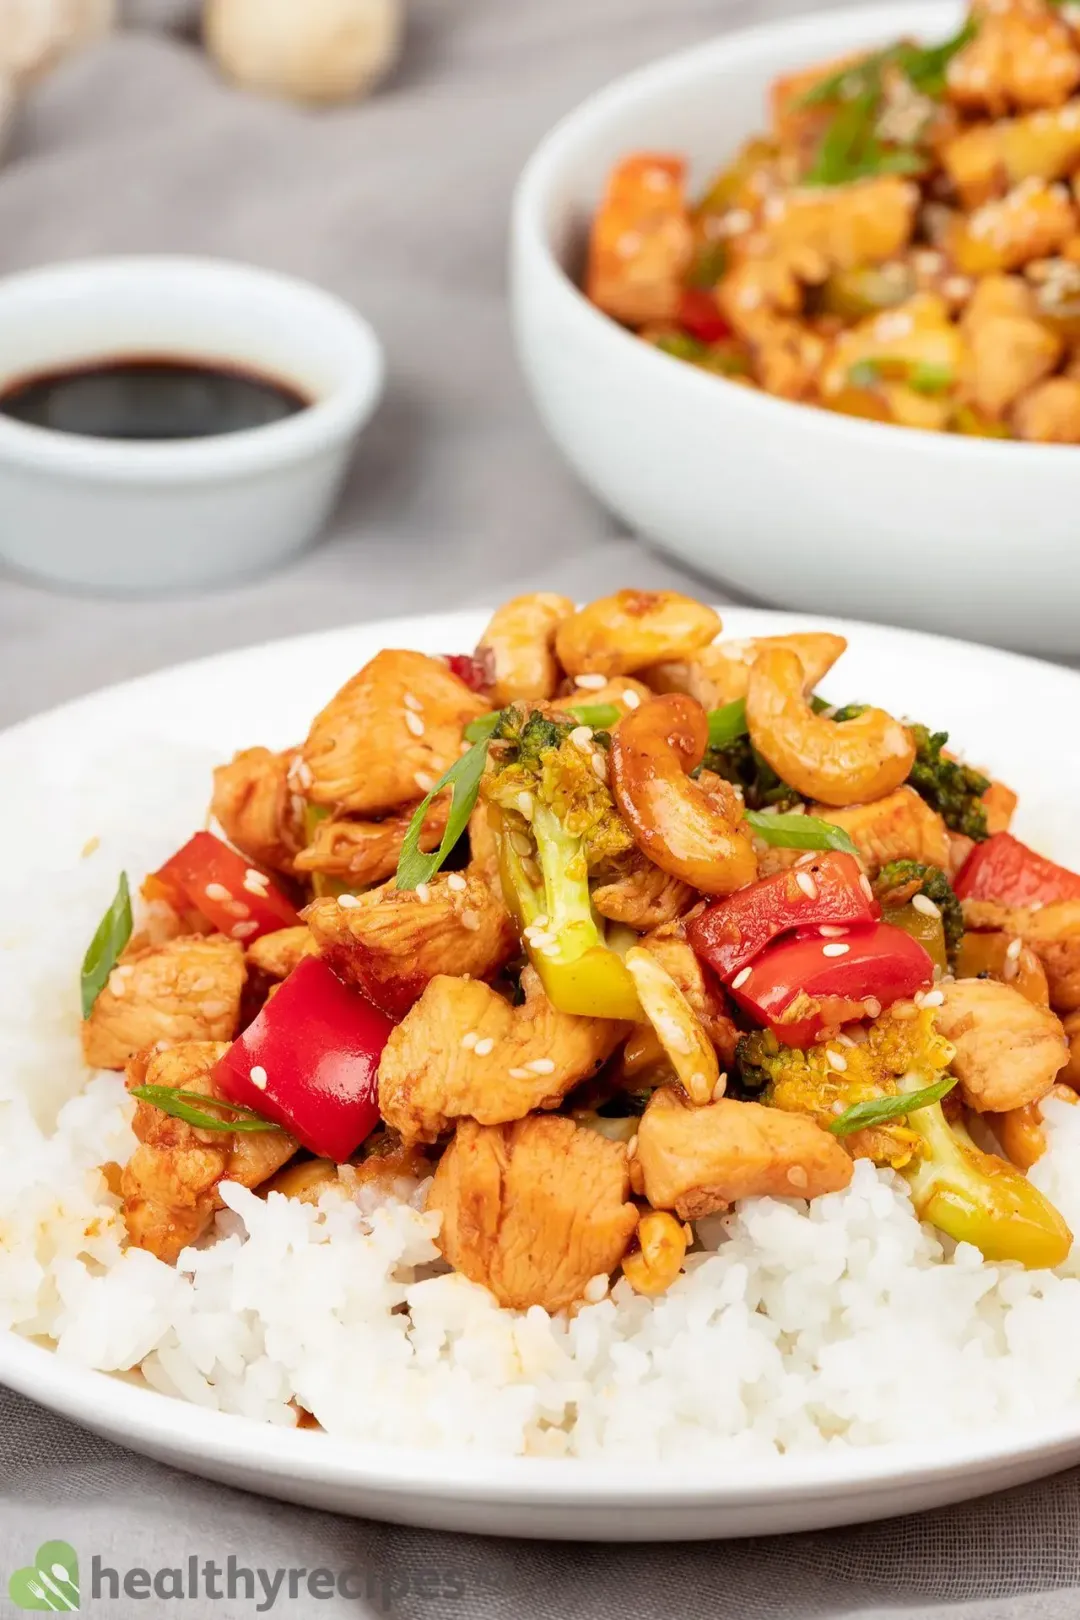 Cashew Chicken Recipe: A Healthy Take on the Popular Chinese Take-out